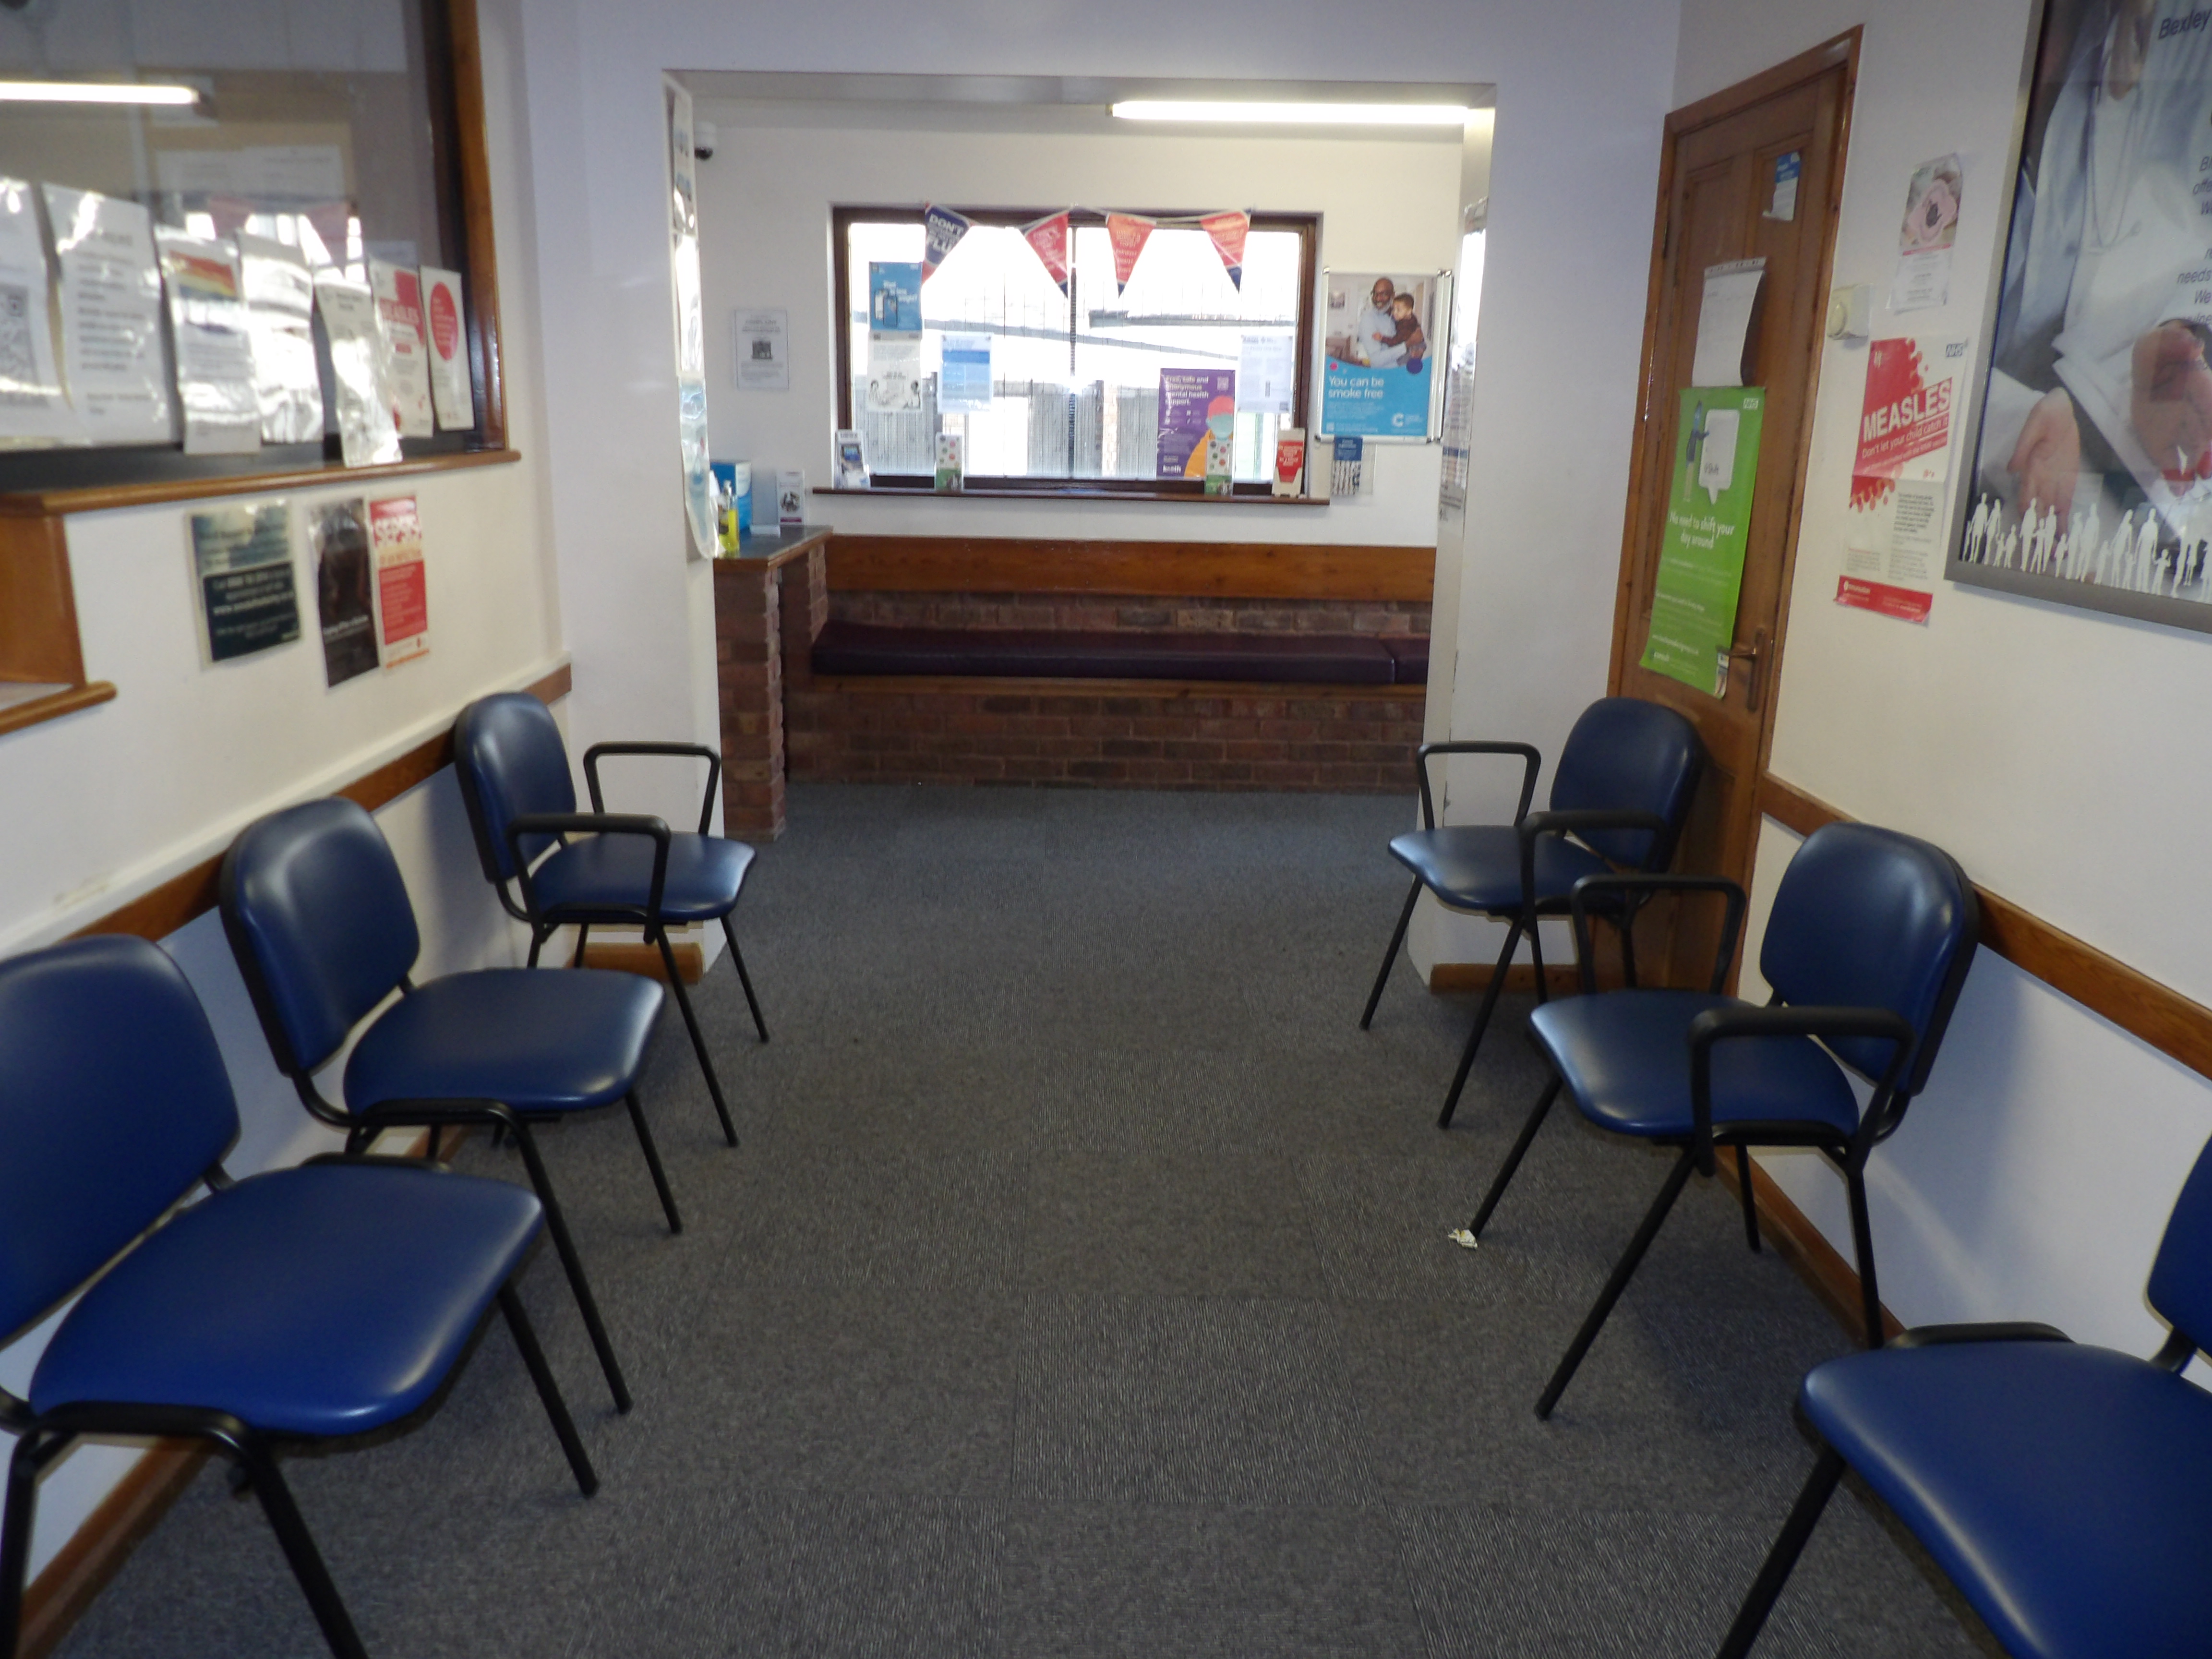 The waiting area and rooms are all ground floor and we have seating with and without arm rests